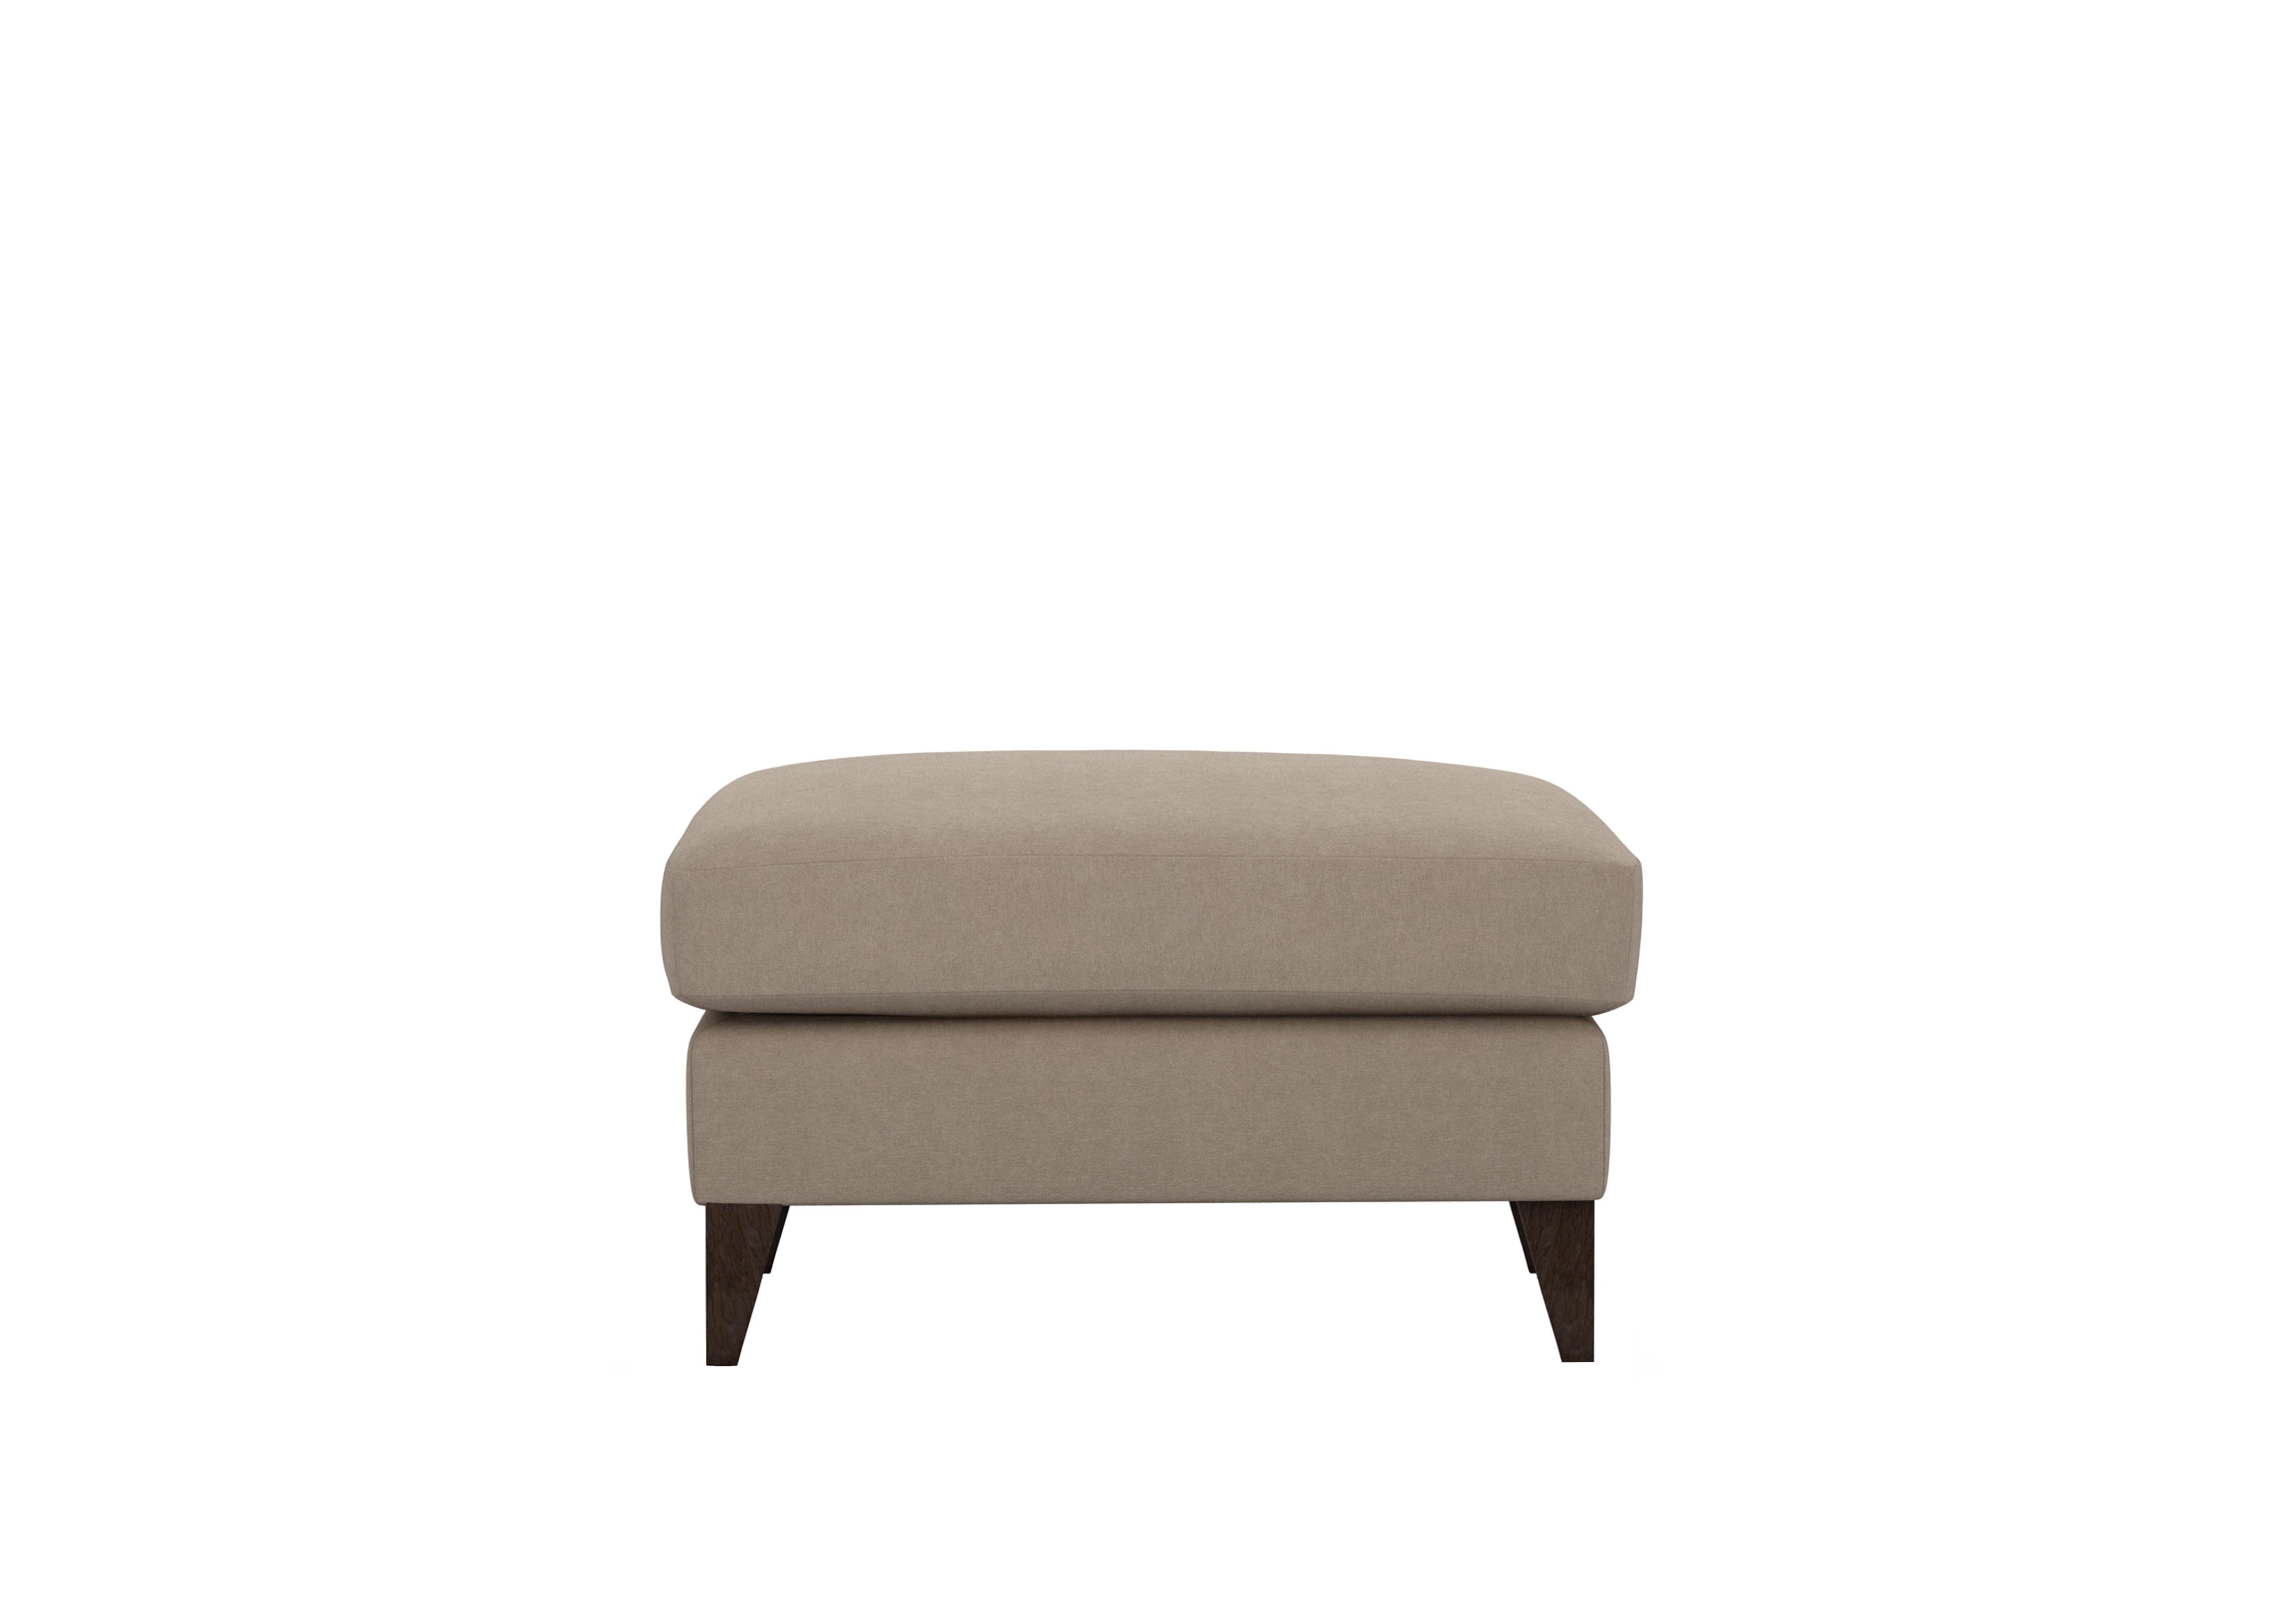 Romilly Fabric Footstool in Bra223 Brandy Butter Wa Ft on Furniture Village